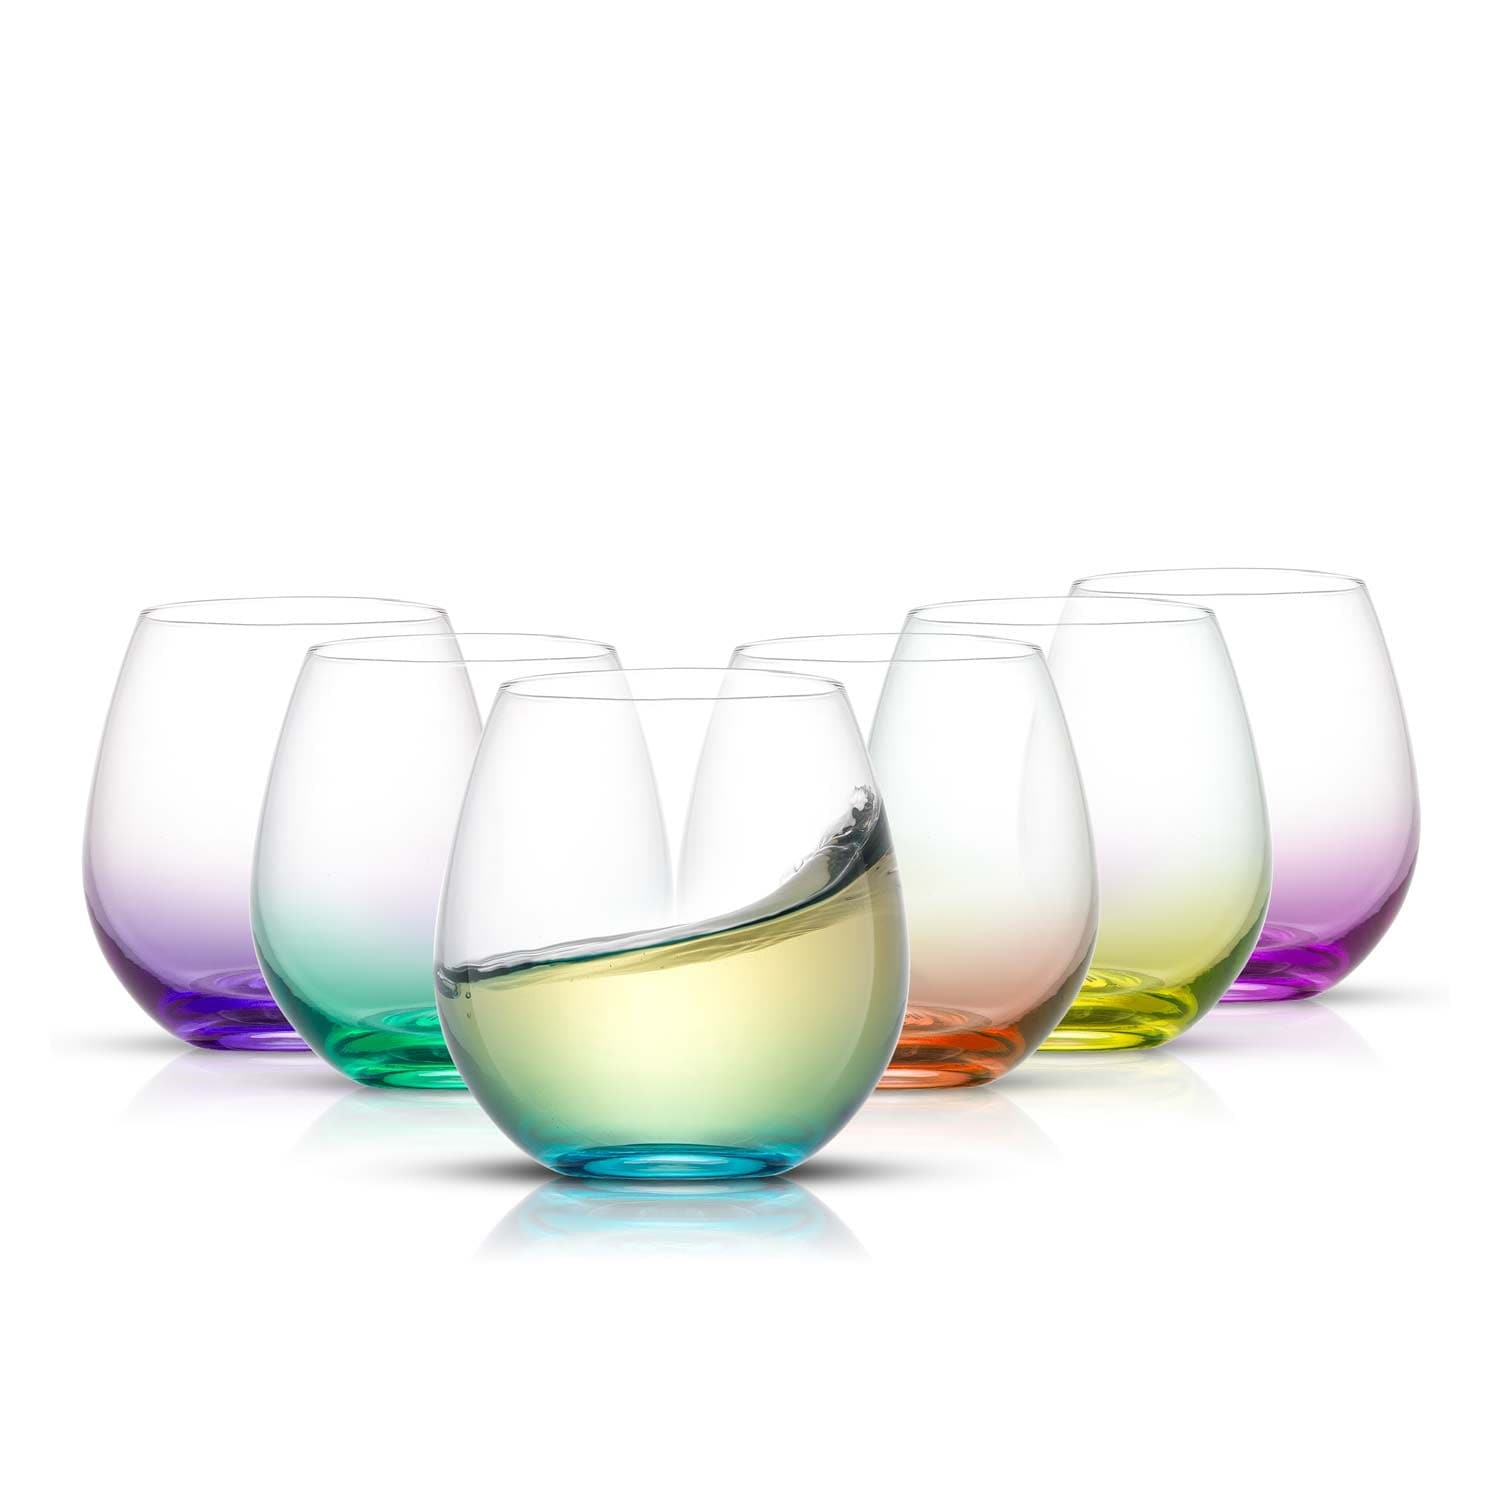 https://ak1.ostkcdn.com/images/products/is/images/direct/e4a59e453edae5e8b84b0cdde6e386d12034b366/JoyJolt-Hue-Stemless-Collection-Colored-Stemless-Wine-Glasses-and-Colored-Stemless-Champagne-Flutes-Set-of-12.jpg